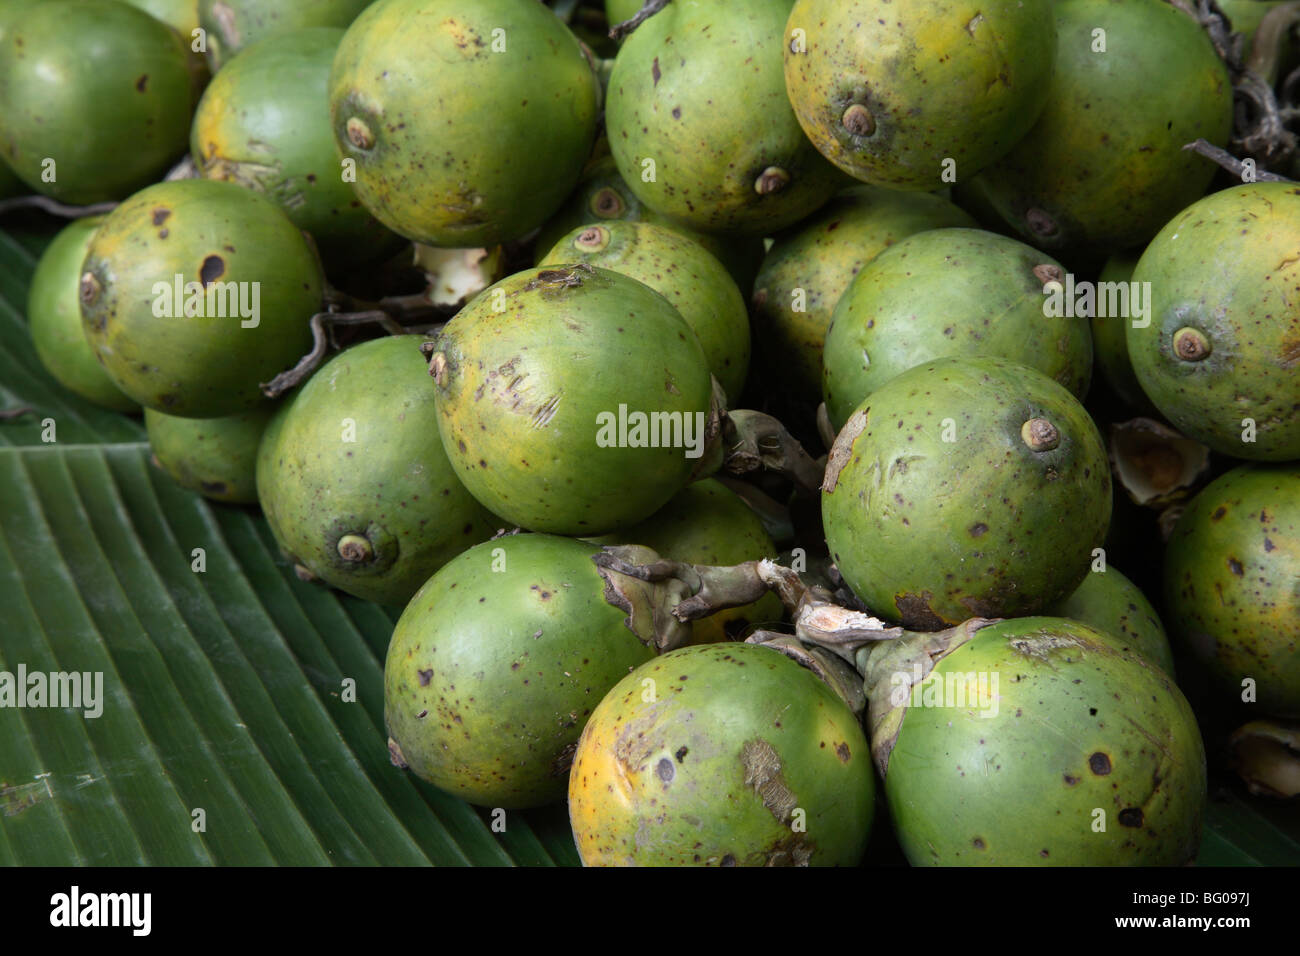 Betel nut, reported to be anti-parasitic, laxative, it also increases heart rate and blood pressure, India Stock Photo